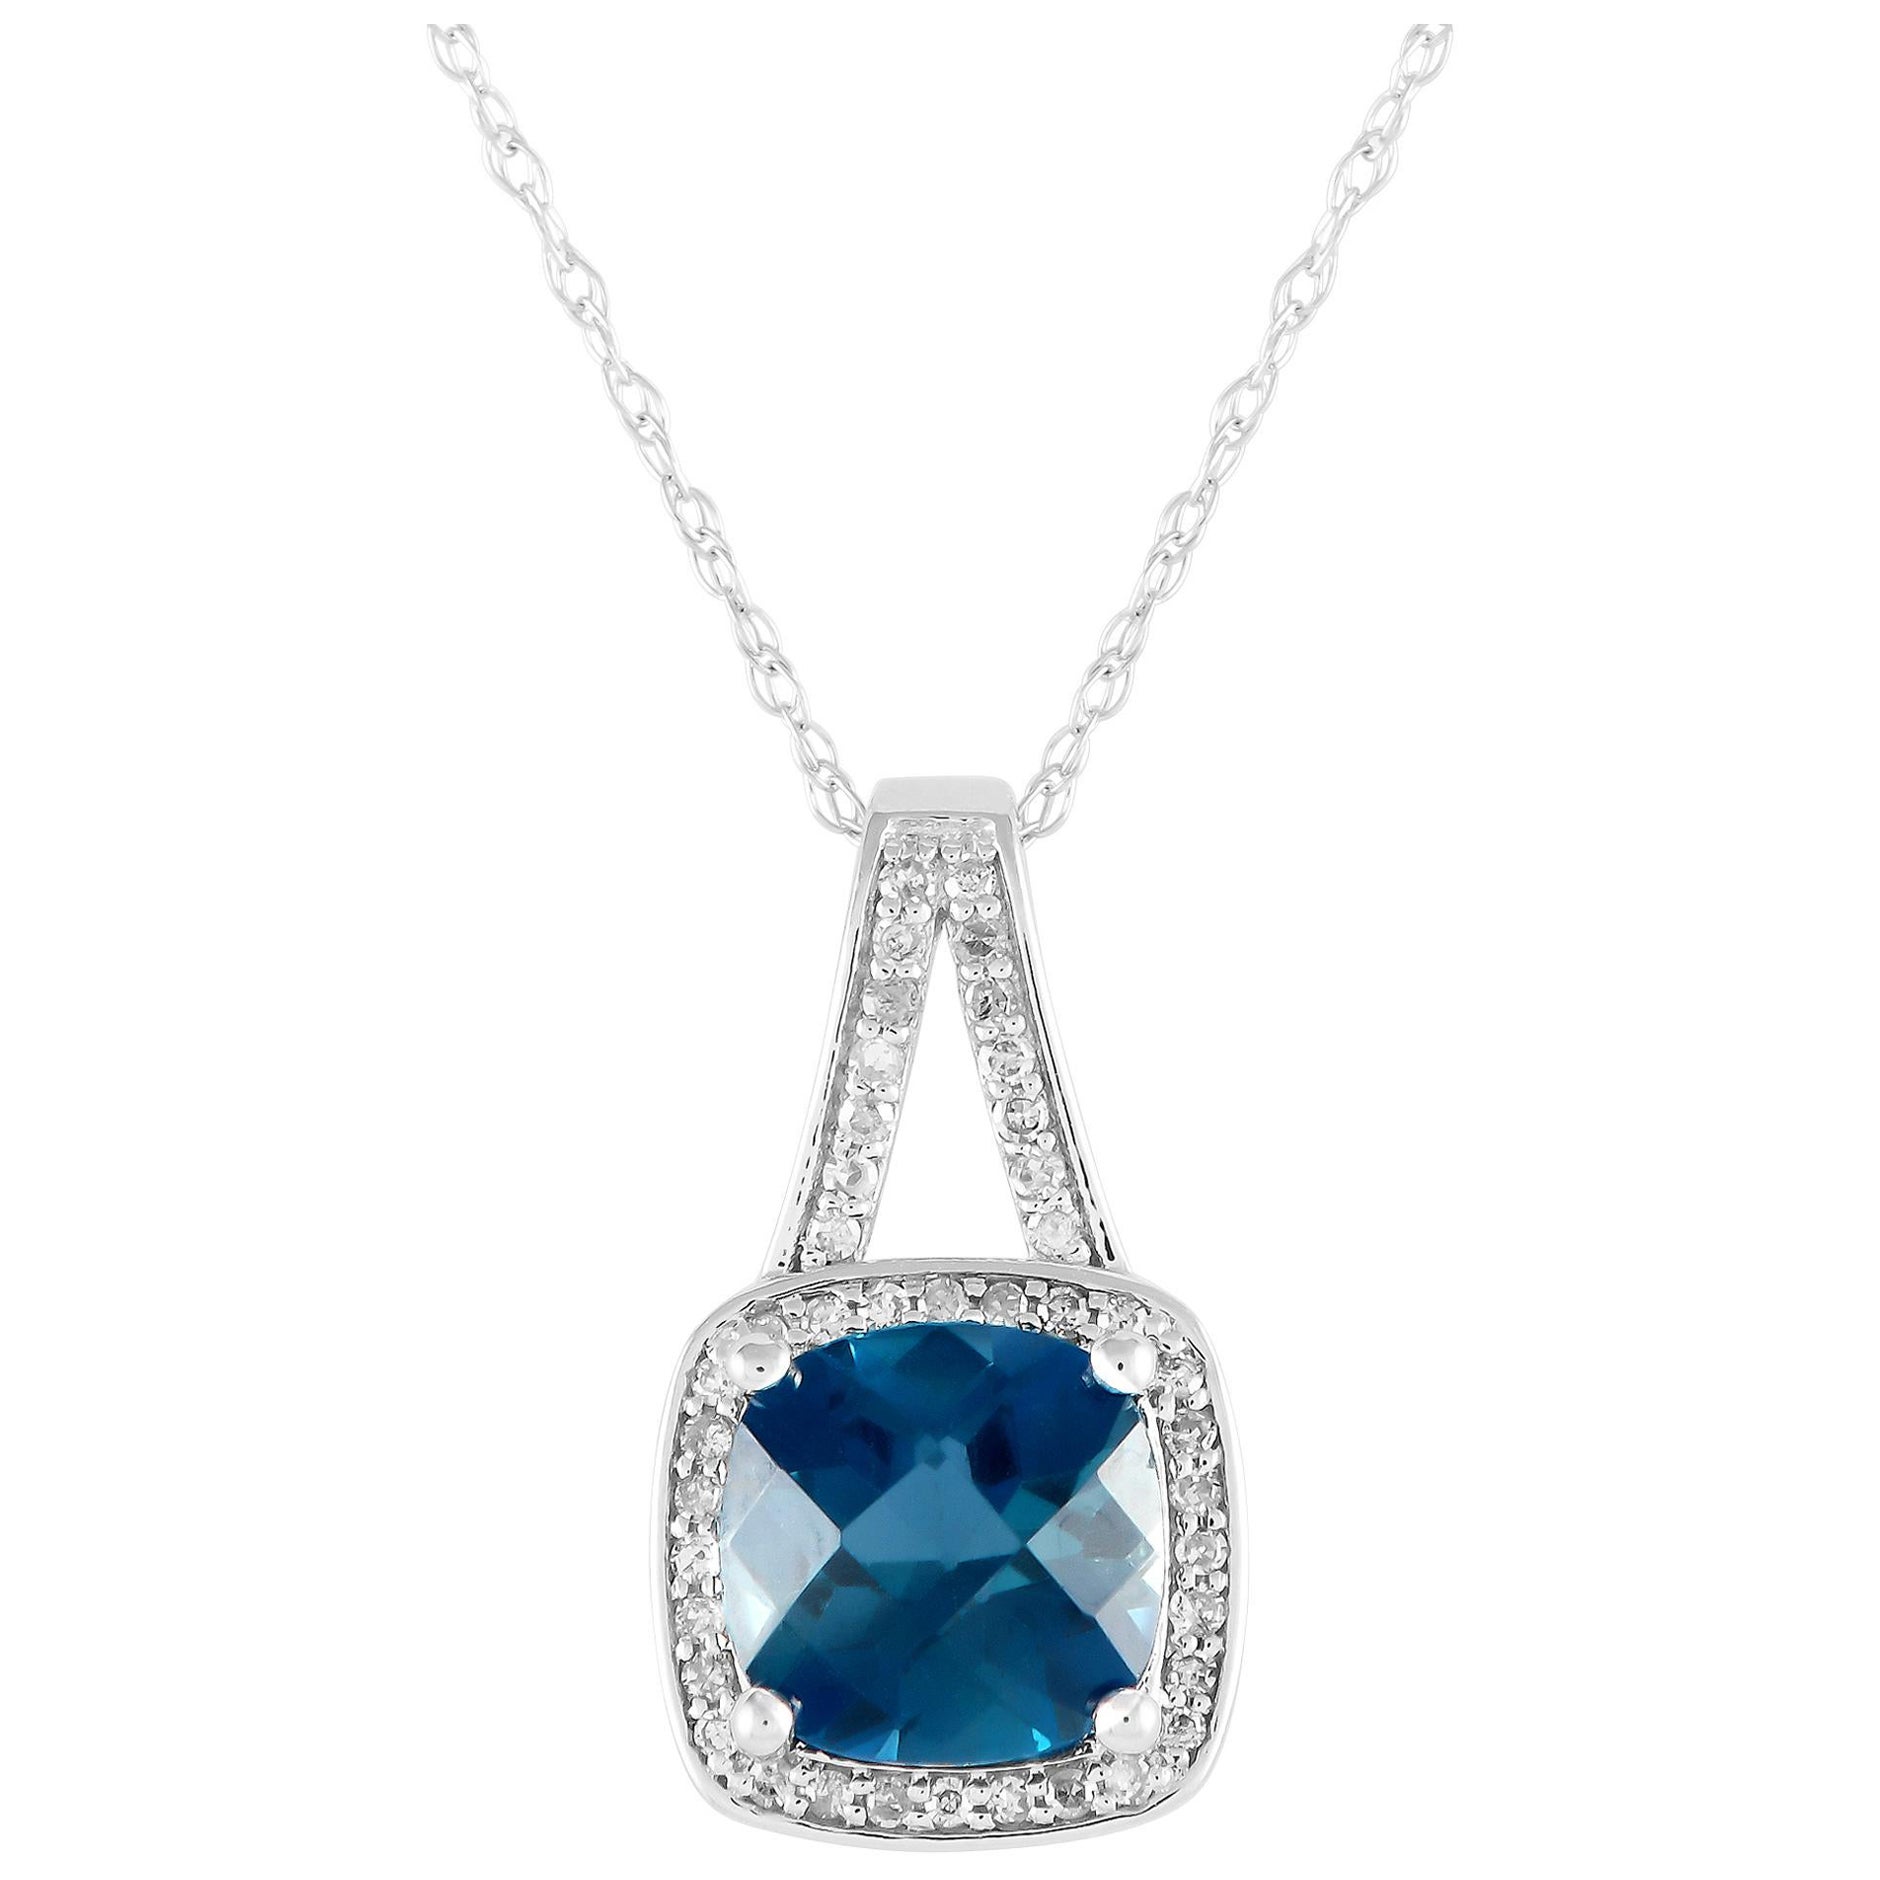 LB Exclusive 14K White Gold 0.12ct Diamond and Blue Topaz Necklace PD4-16273WBT For Sale